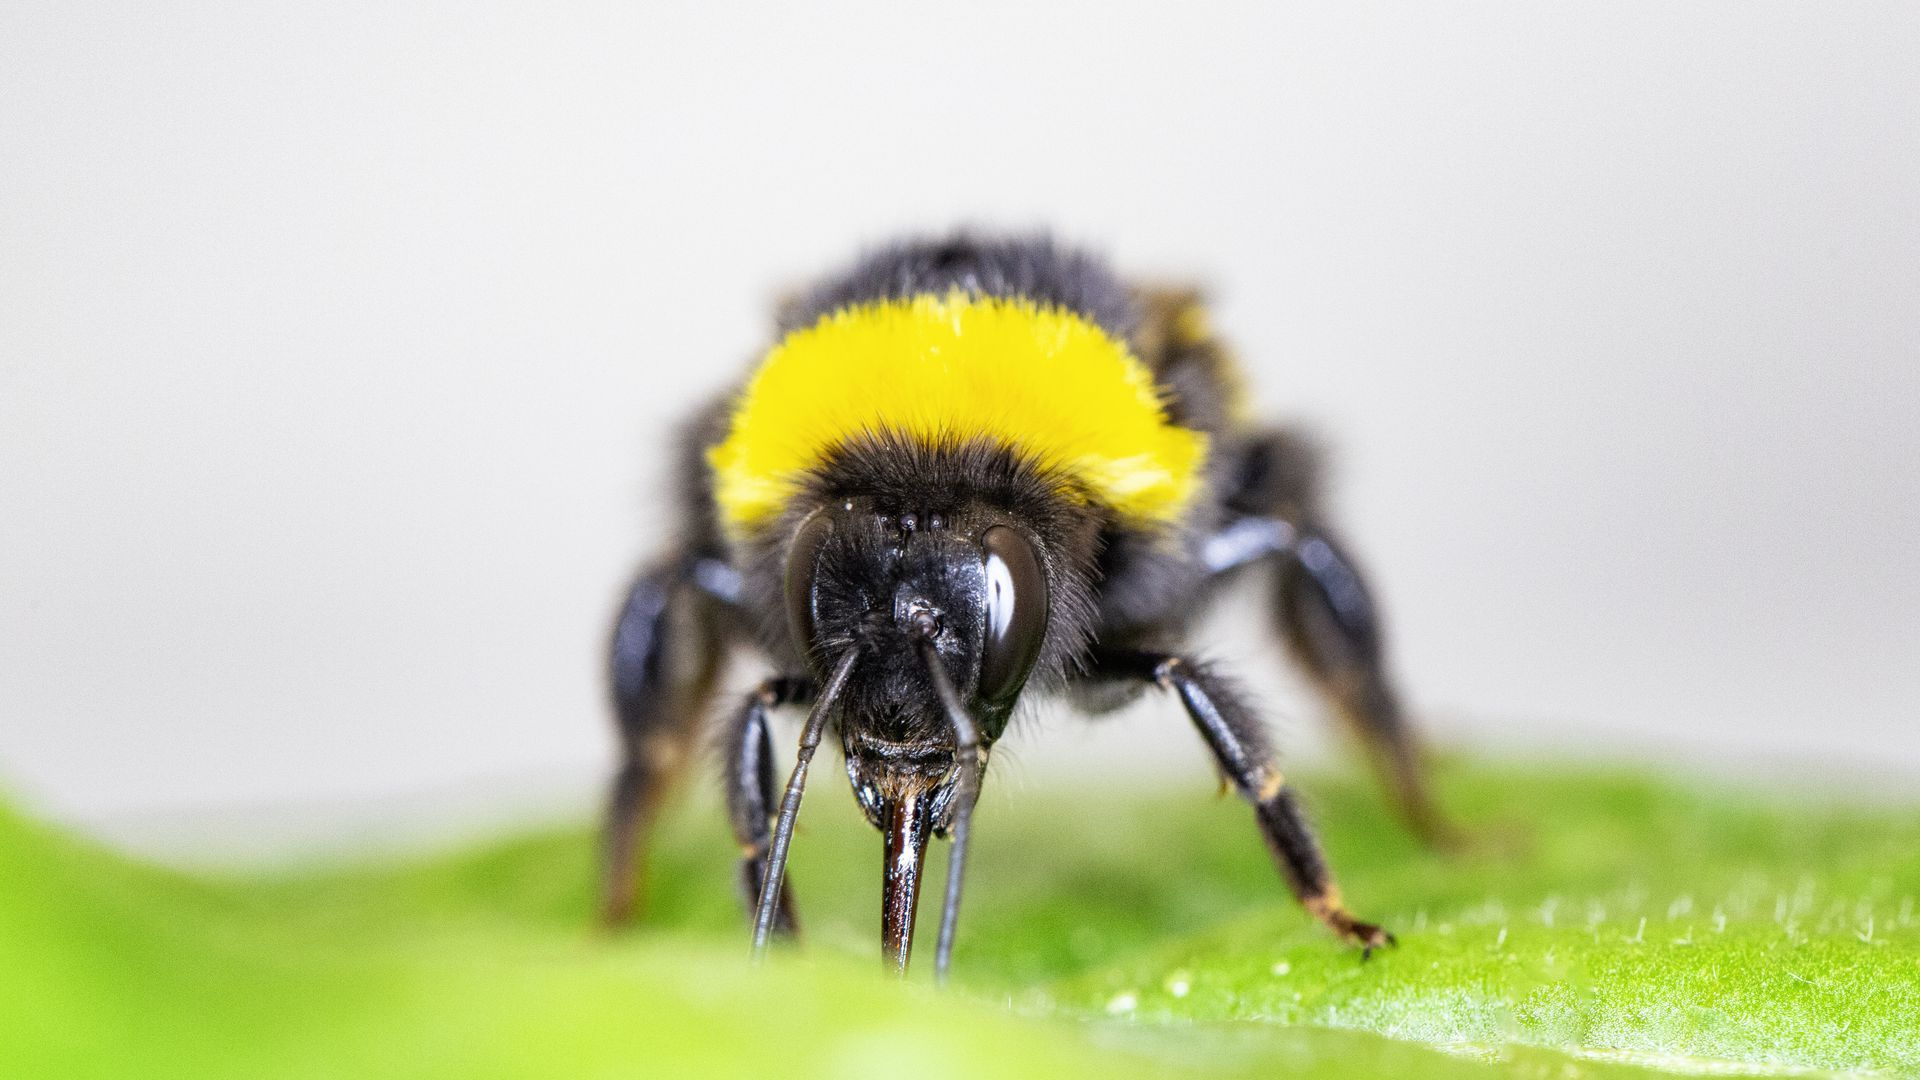 A bumblebee worker damaging a plant leaf. 